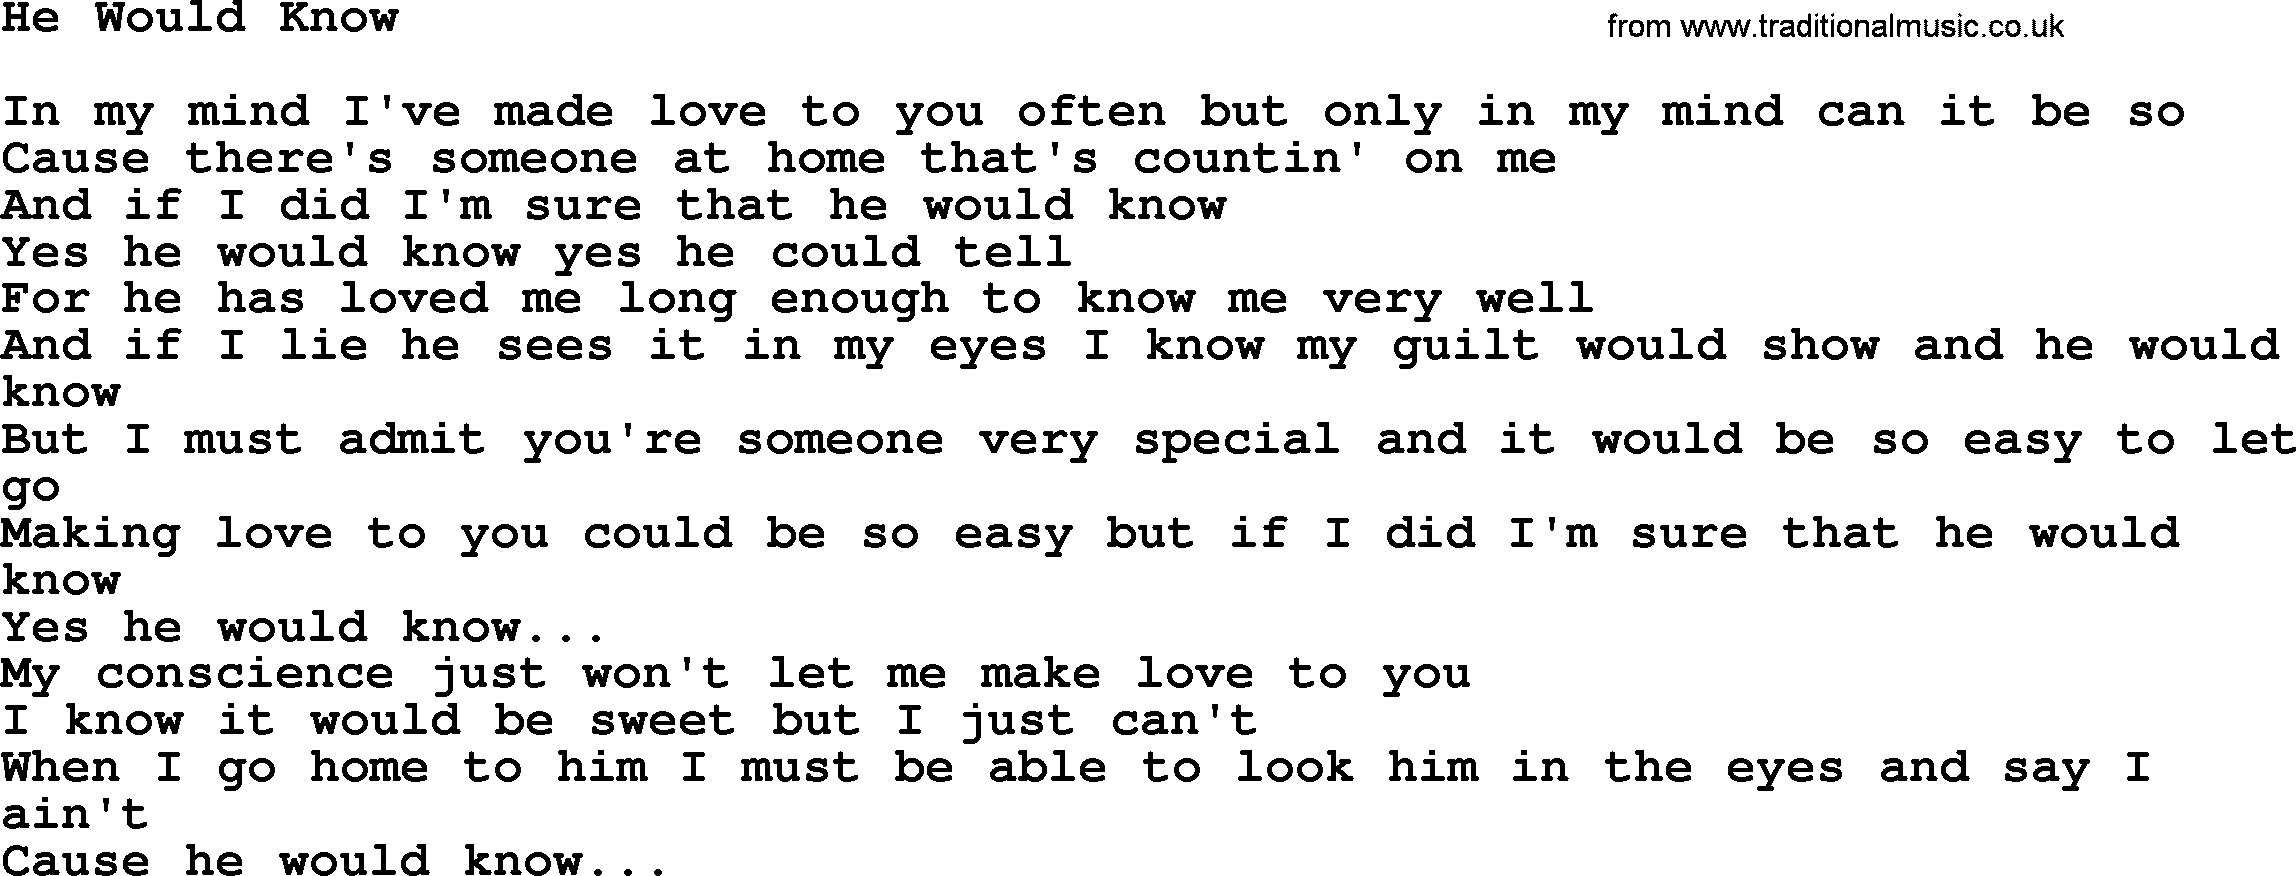 Dolly Parton song He Would Know.txt lyrics